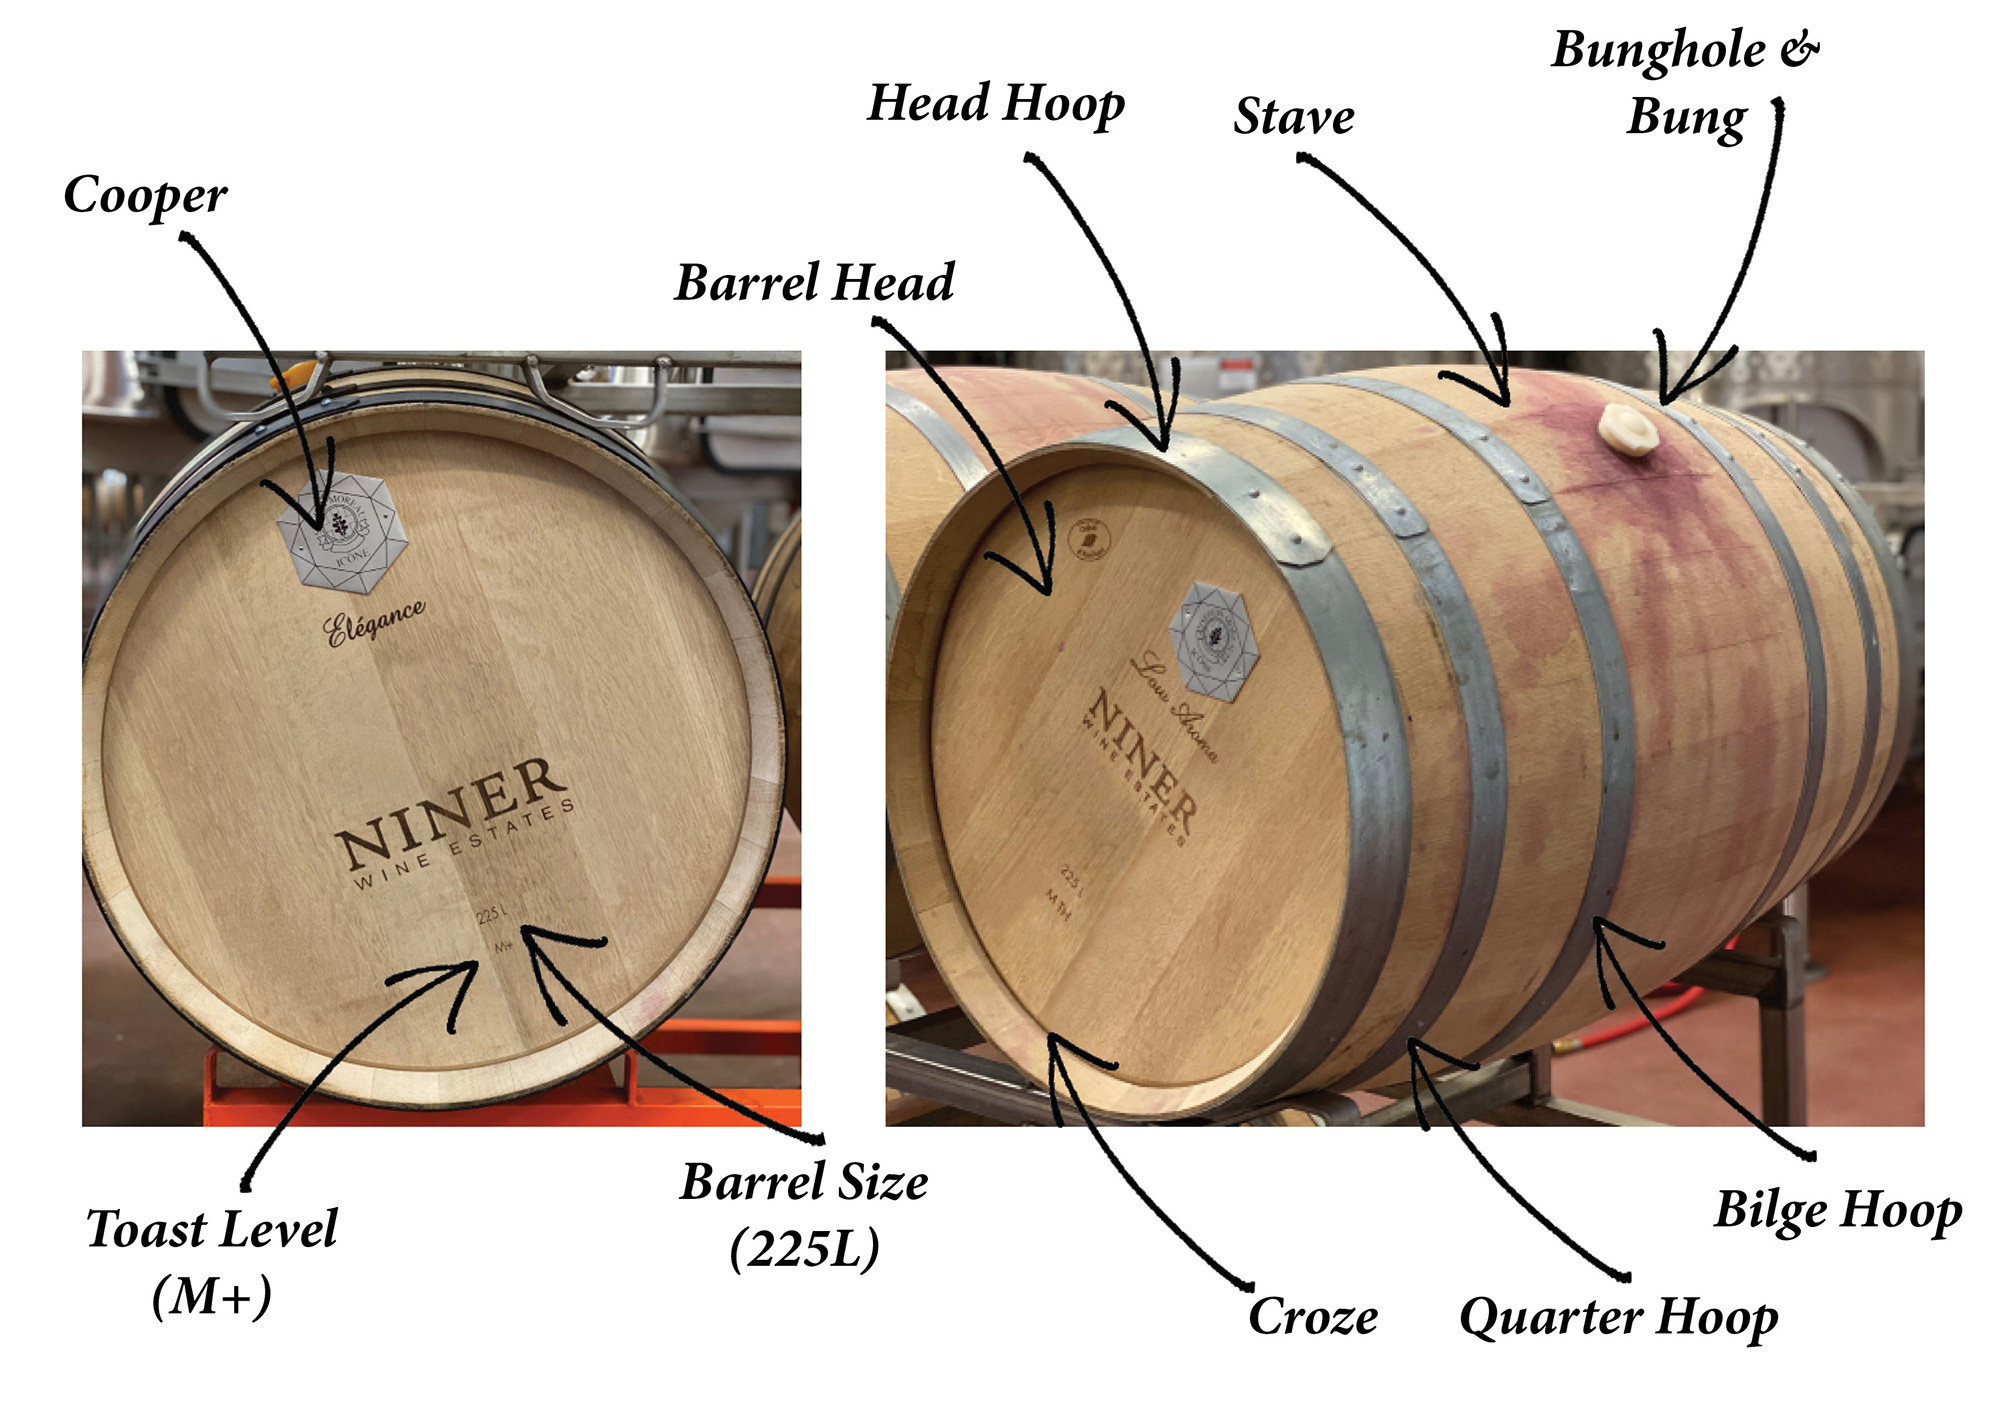 Two images showing labeled parts of a barrel head and finished full barrel.